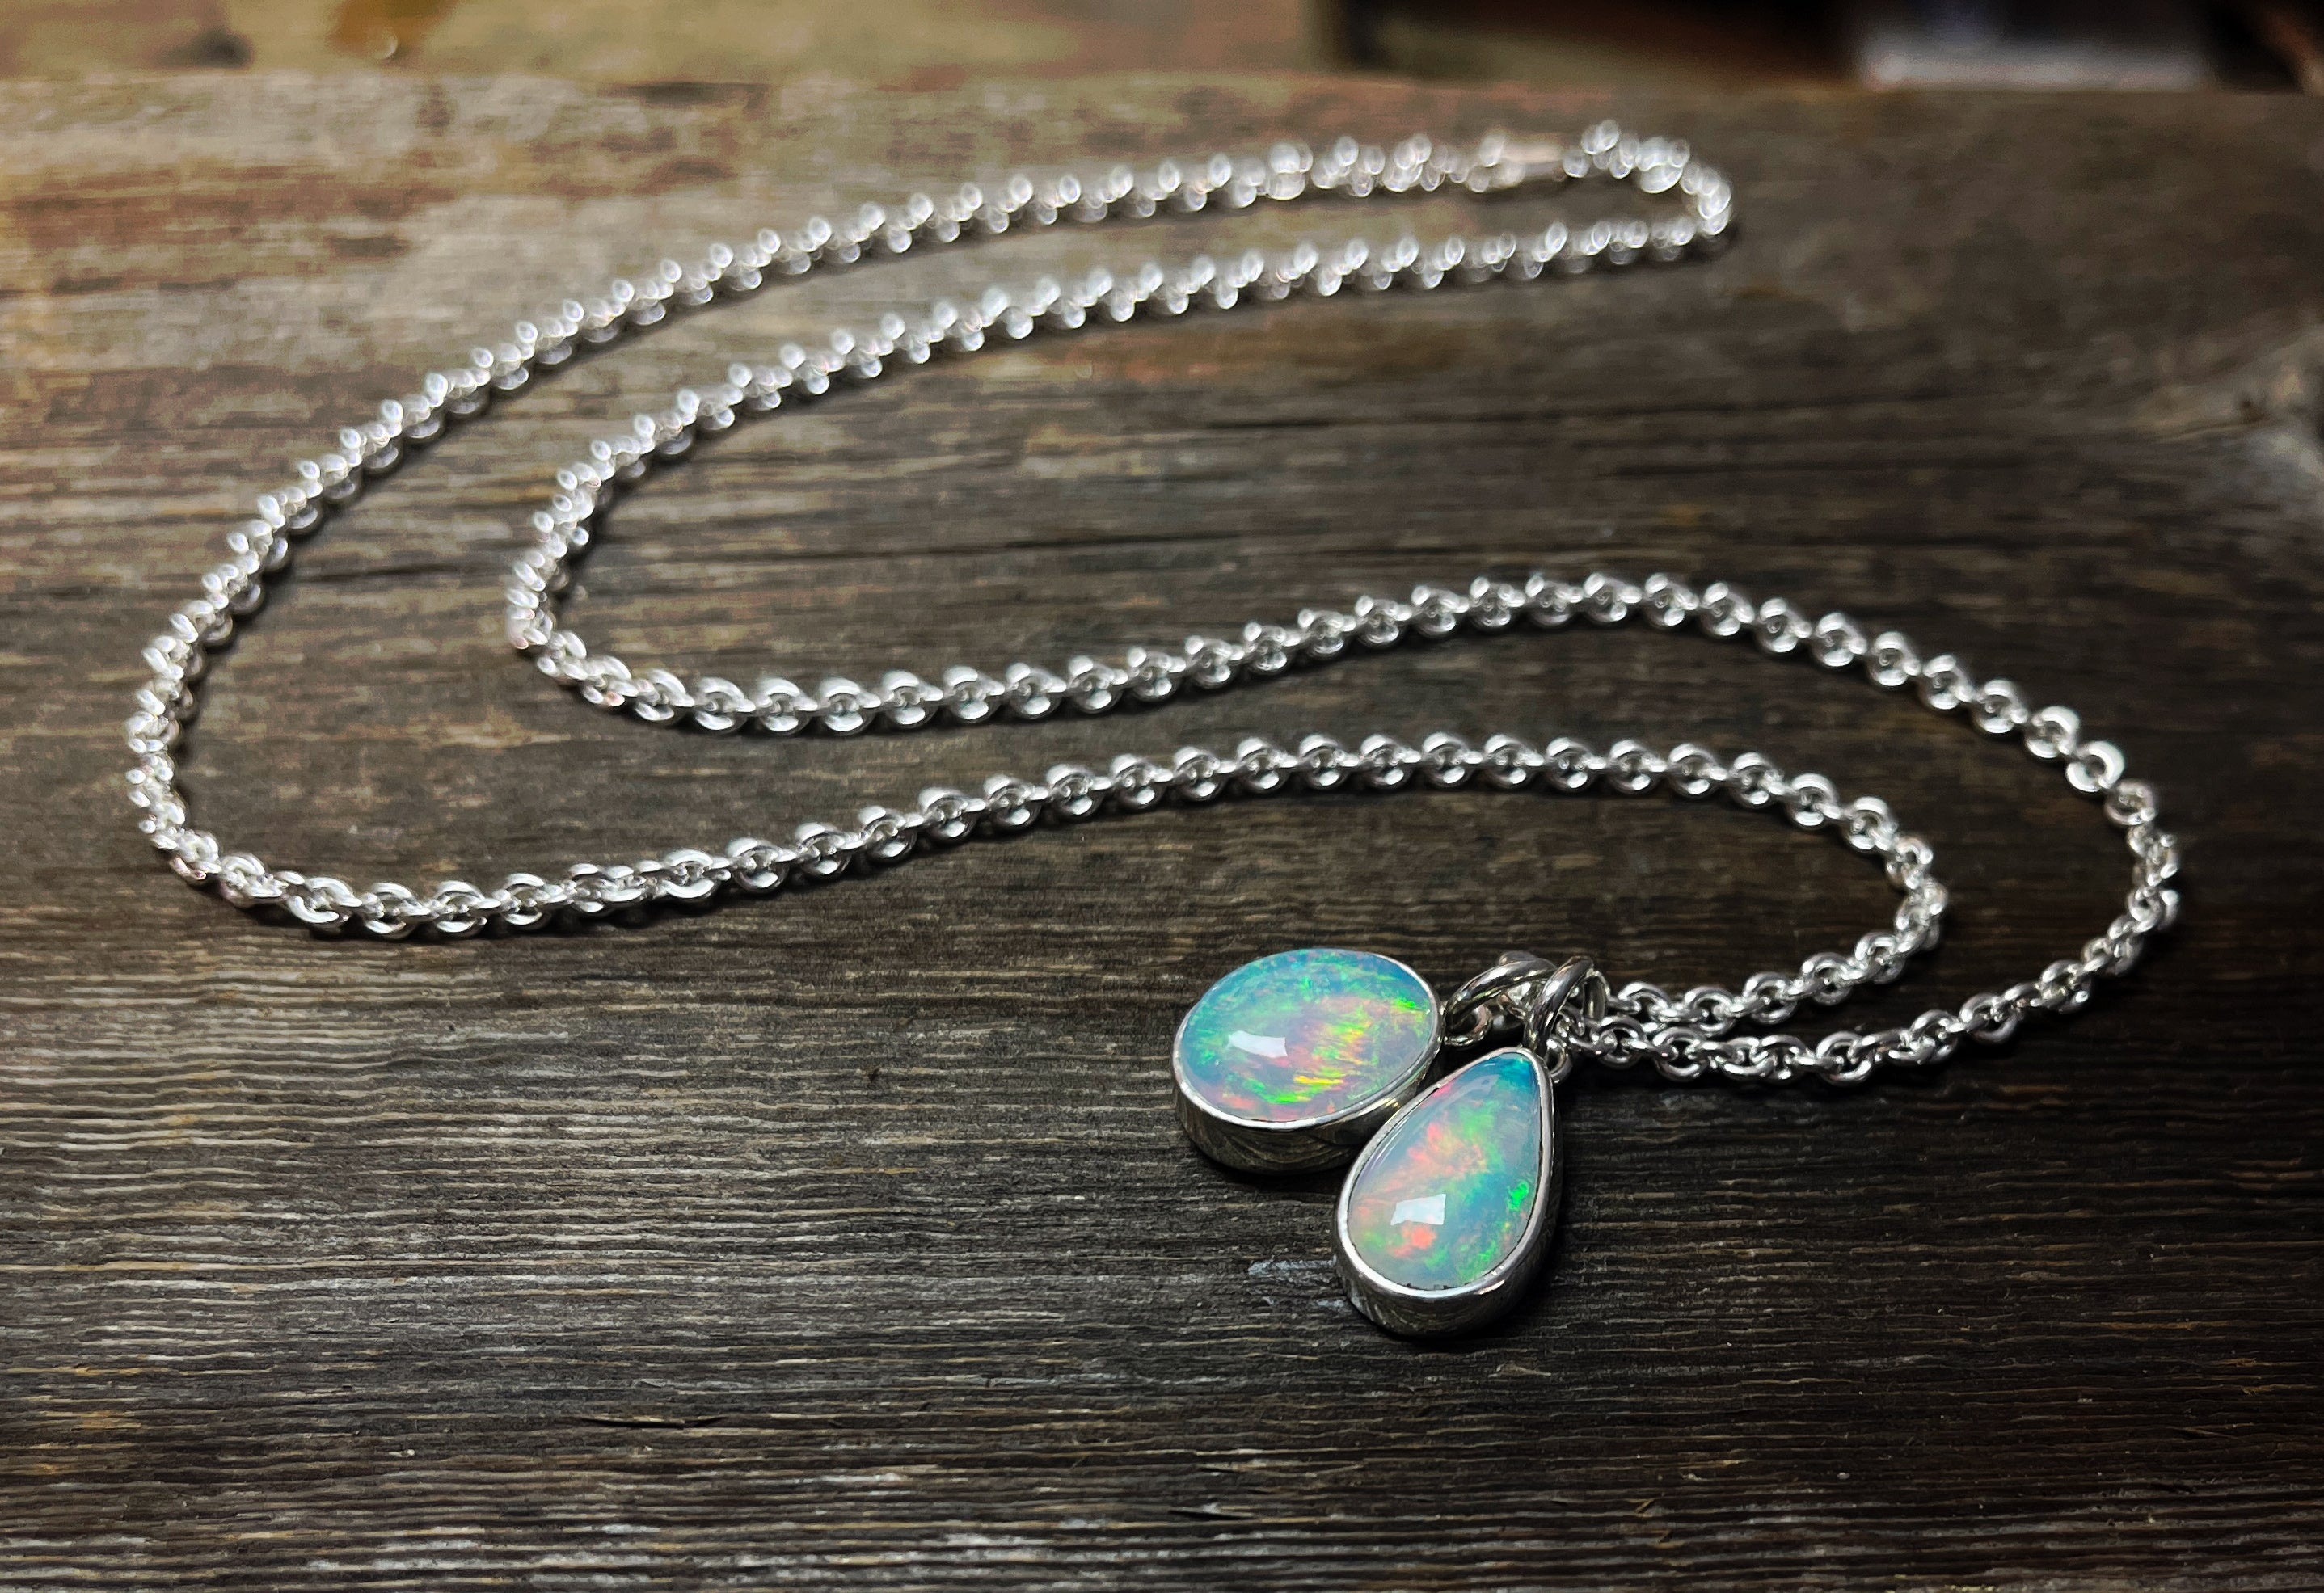 Opal Necklace, Double Opal Pendant, Ethiopian Opal Necklace in Sterling Silver, Layering Necklace, Gift for Her, Gemstone Necklace, Handmade